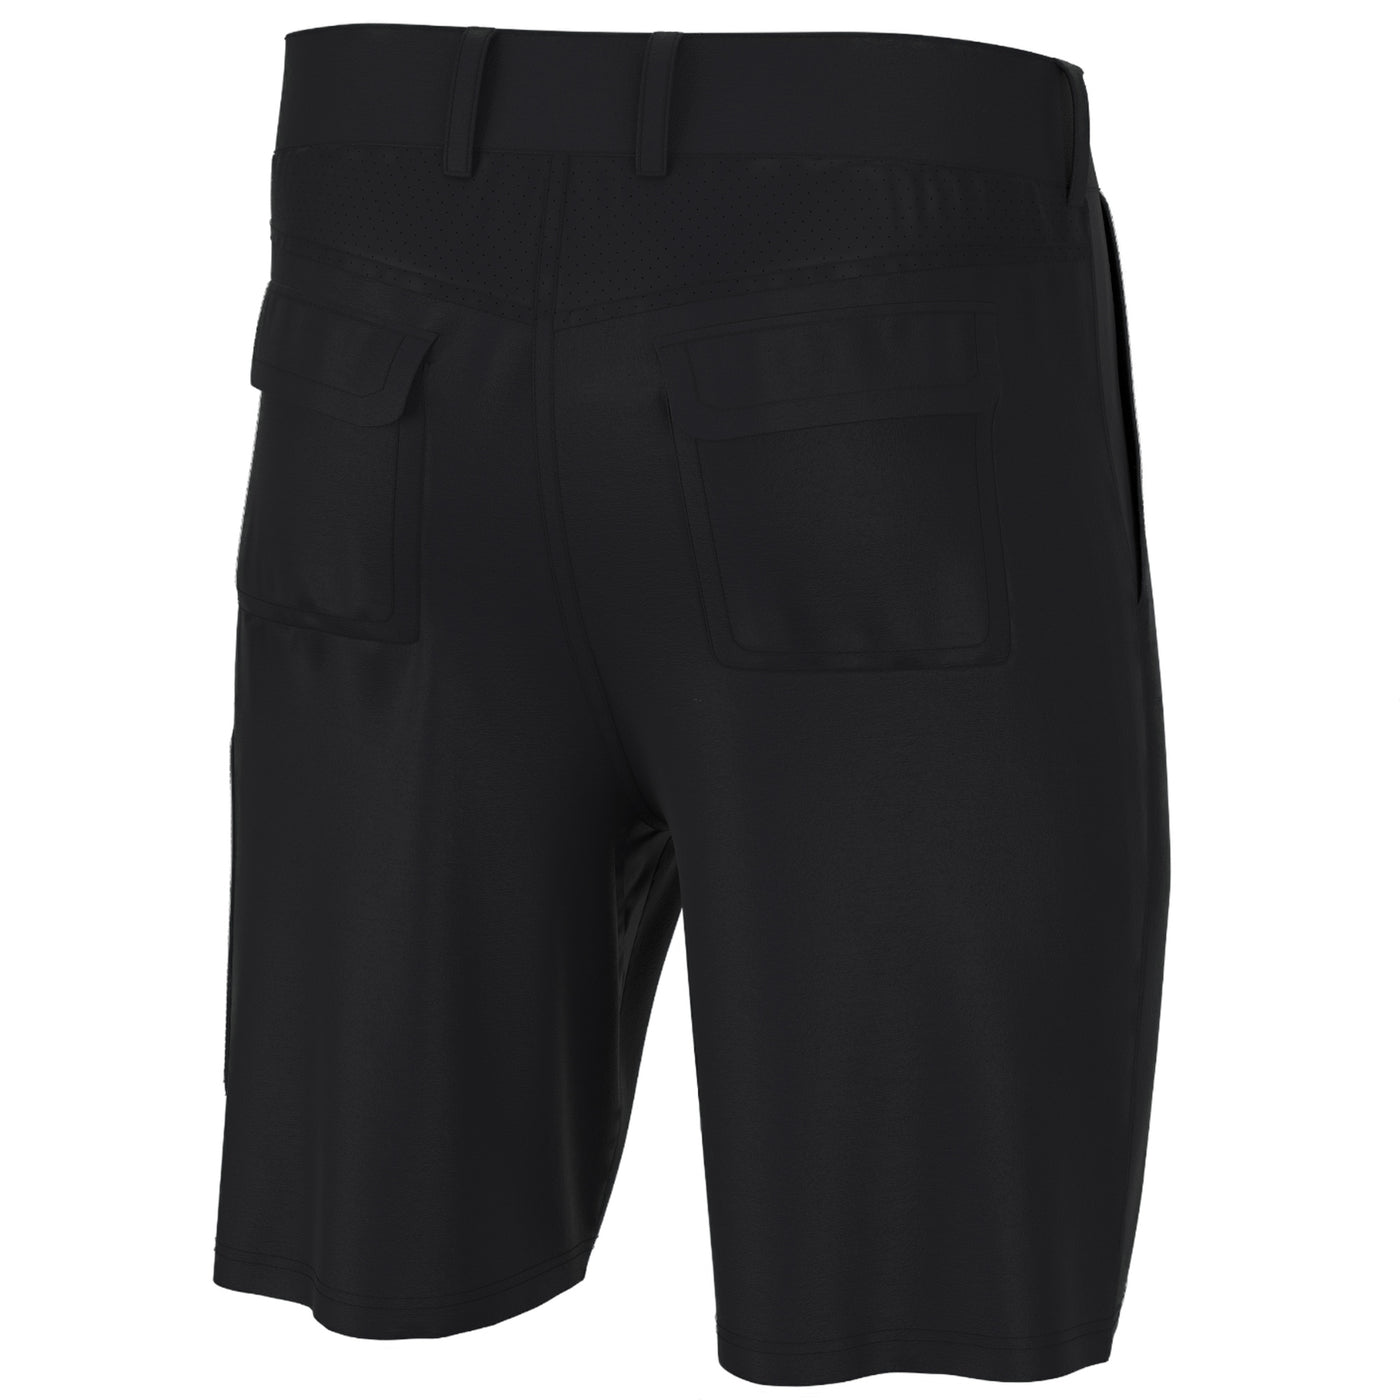 Huk Next Level Shorts - Best Quality Online At Low Prices - Melton Tackle